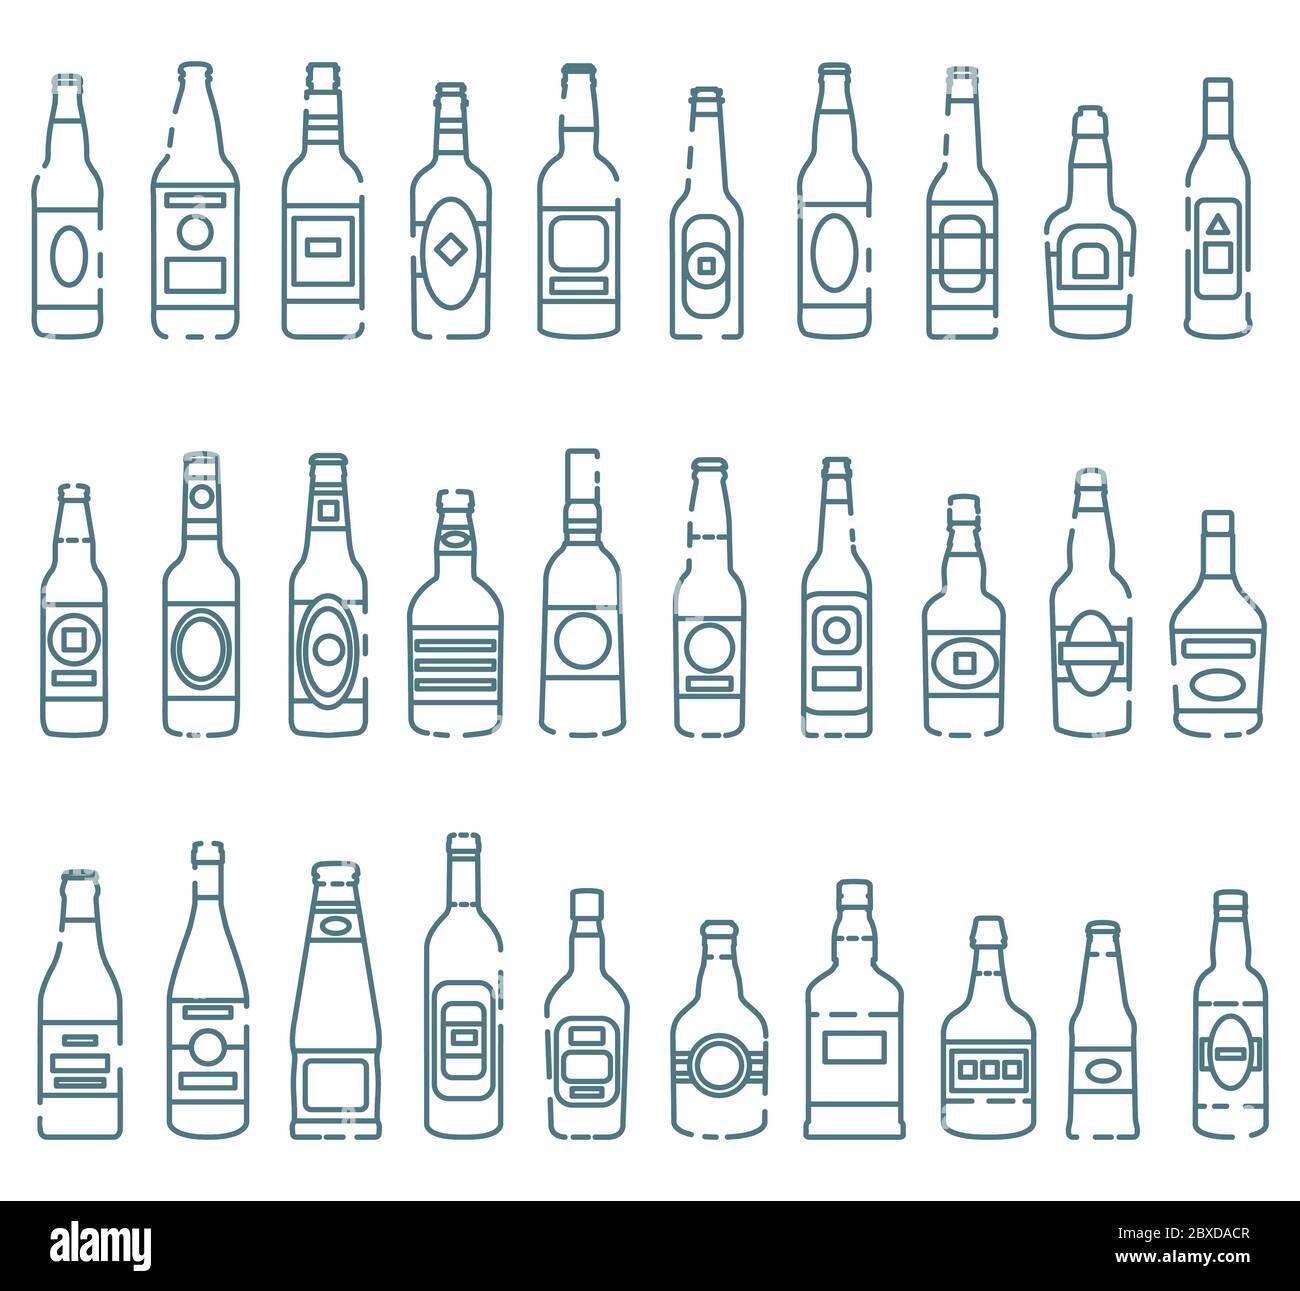 Set of colored icons of alcoholic drinks' bottles. Vector isolated outline illustrations Stock Vector